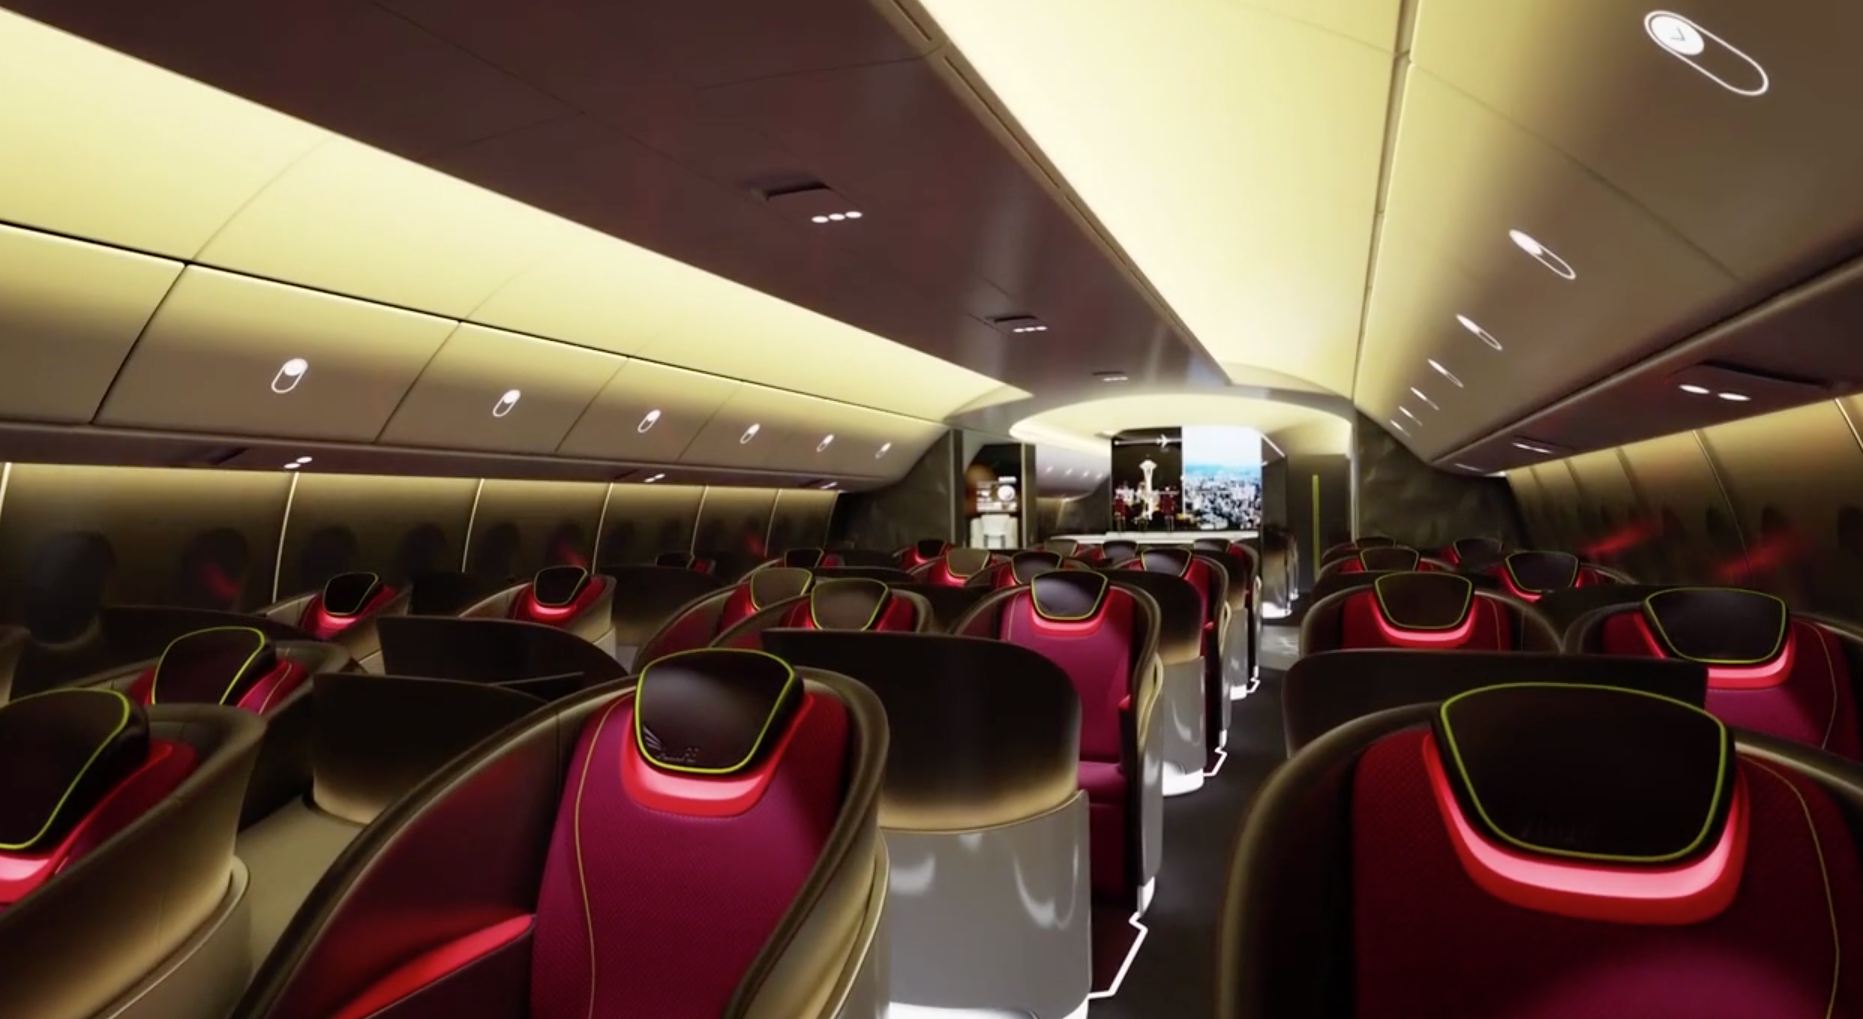 Boeing Wants To Turn The Interiors Of Its Planes Into Giant Screens